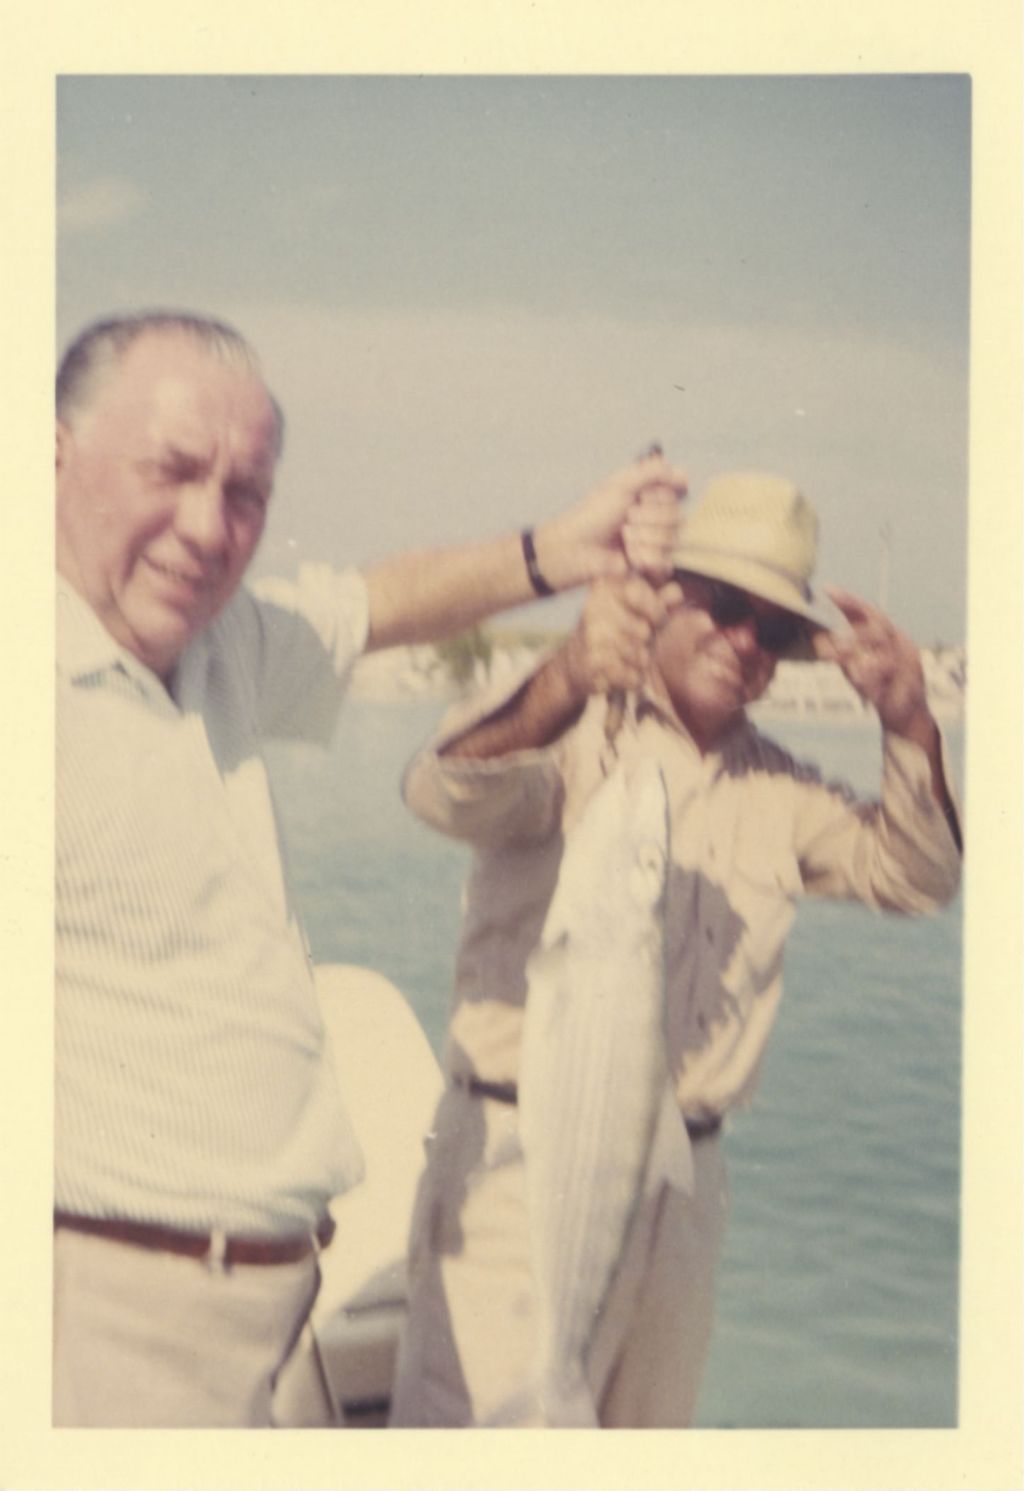 Richard J. Daley and a man displaying their catch